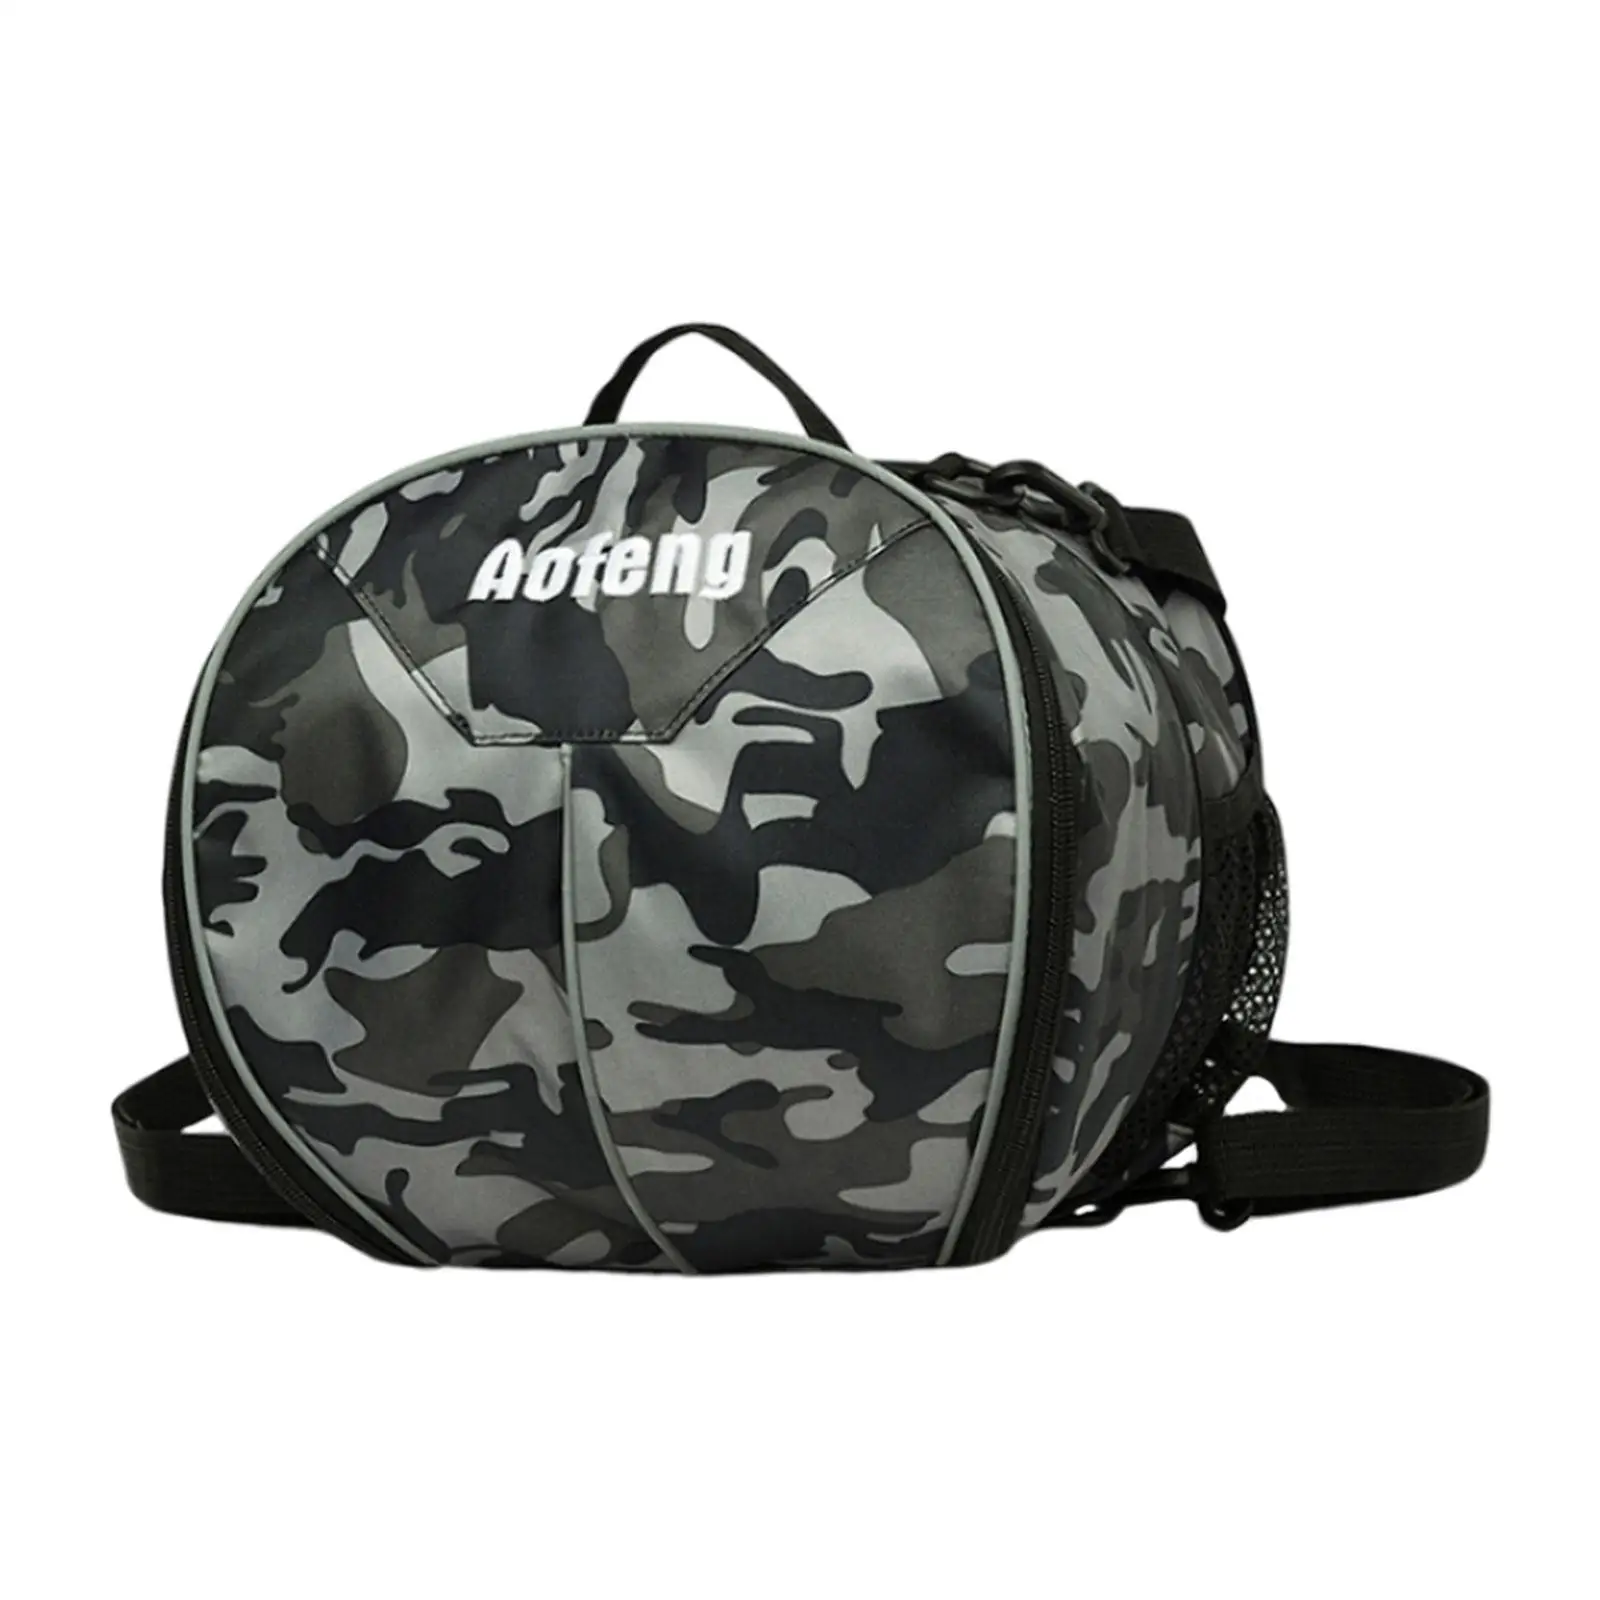 Basketball Shoulder Bag with 2 Side Pockets Dual Zippers Closure Durable Soccer Storage Bag for Softball Football Volleyball